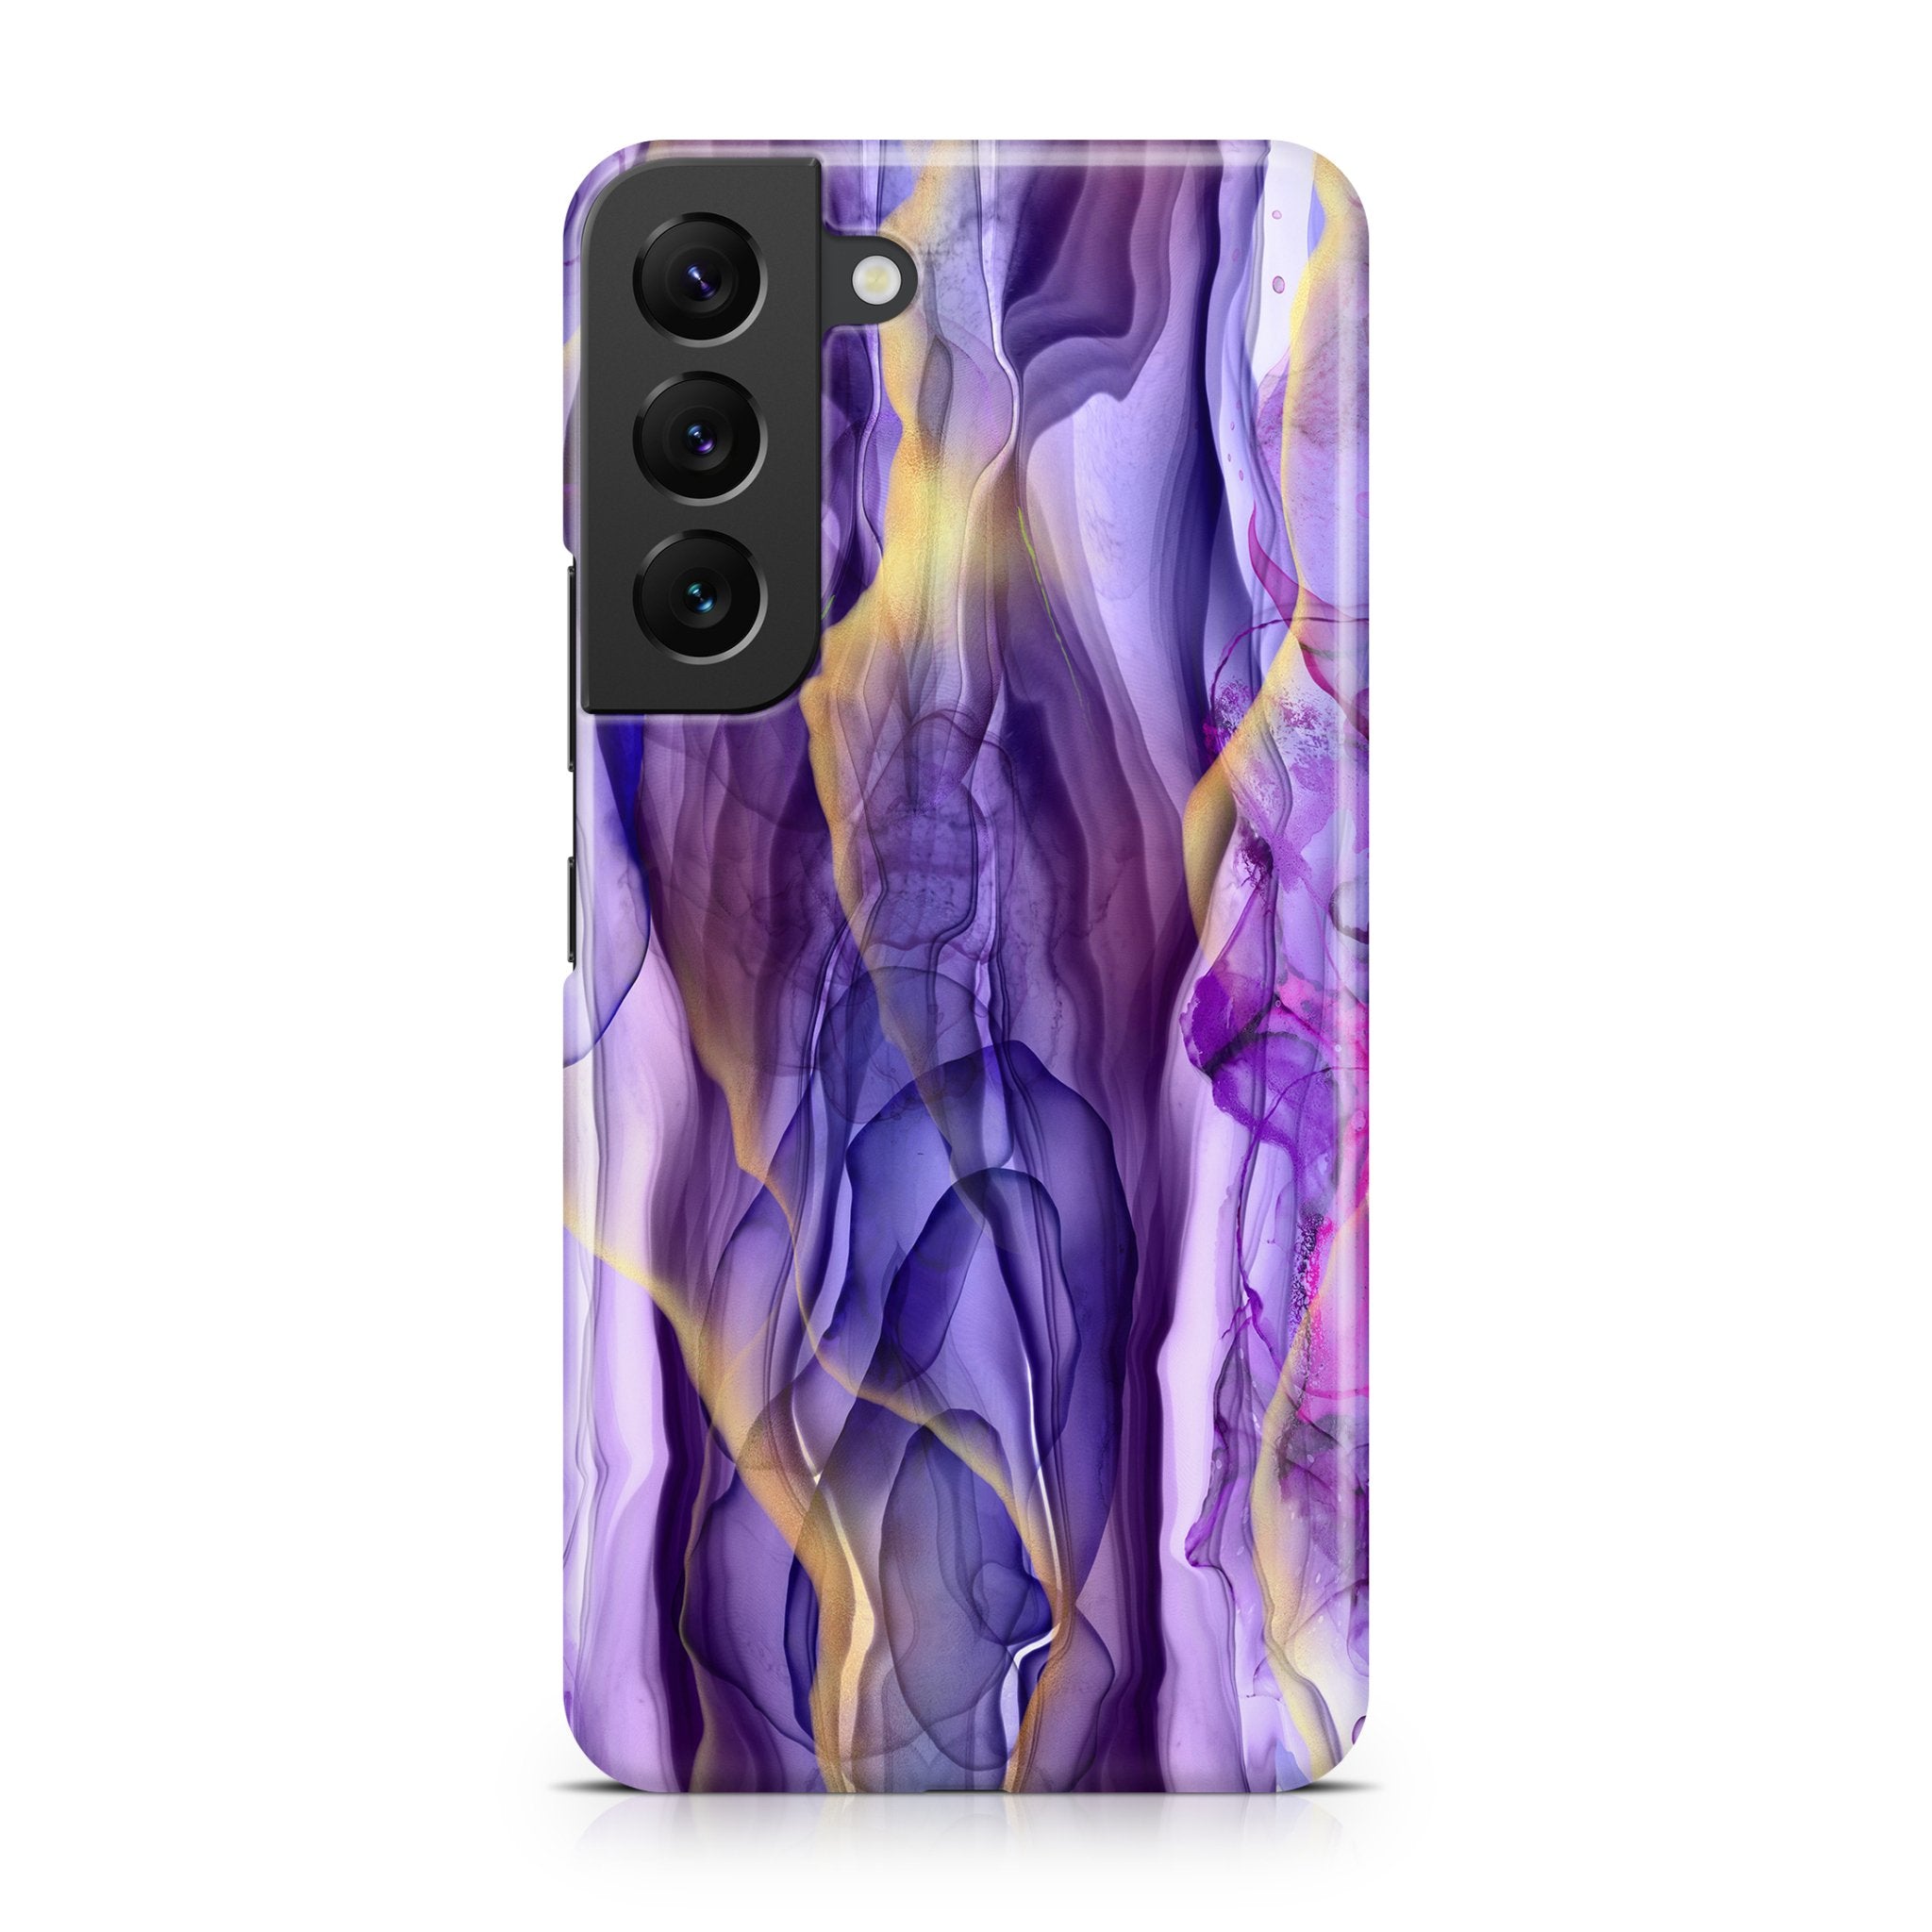 Violet Wisps - Samsung phone case designs by CaseSwagger